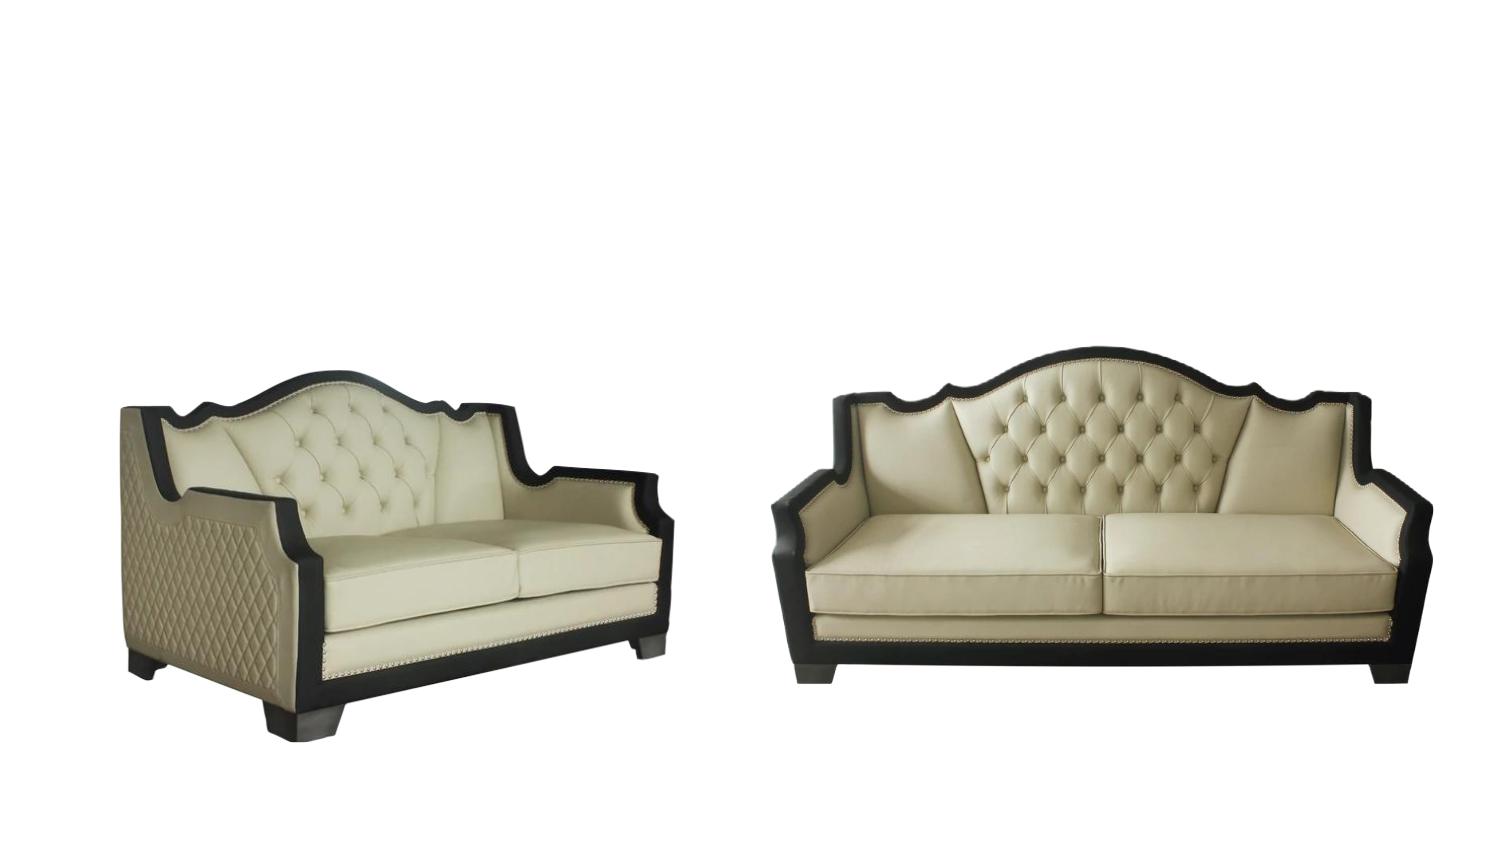 Transitional Sofa Loveseat and Chair Set House Beatrice 58810-3pcs in Beige PU